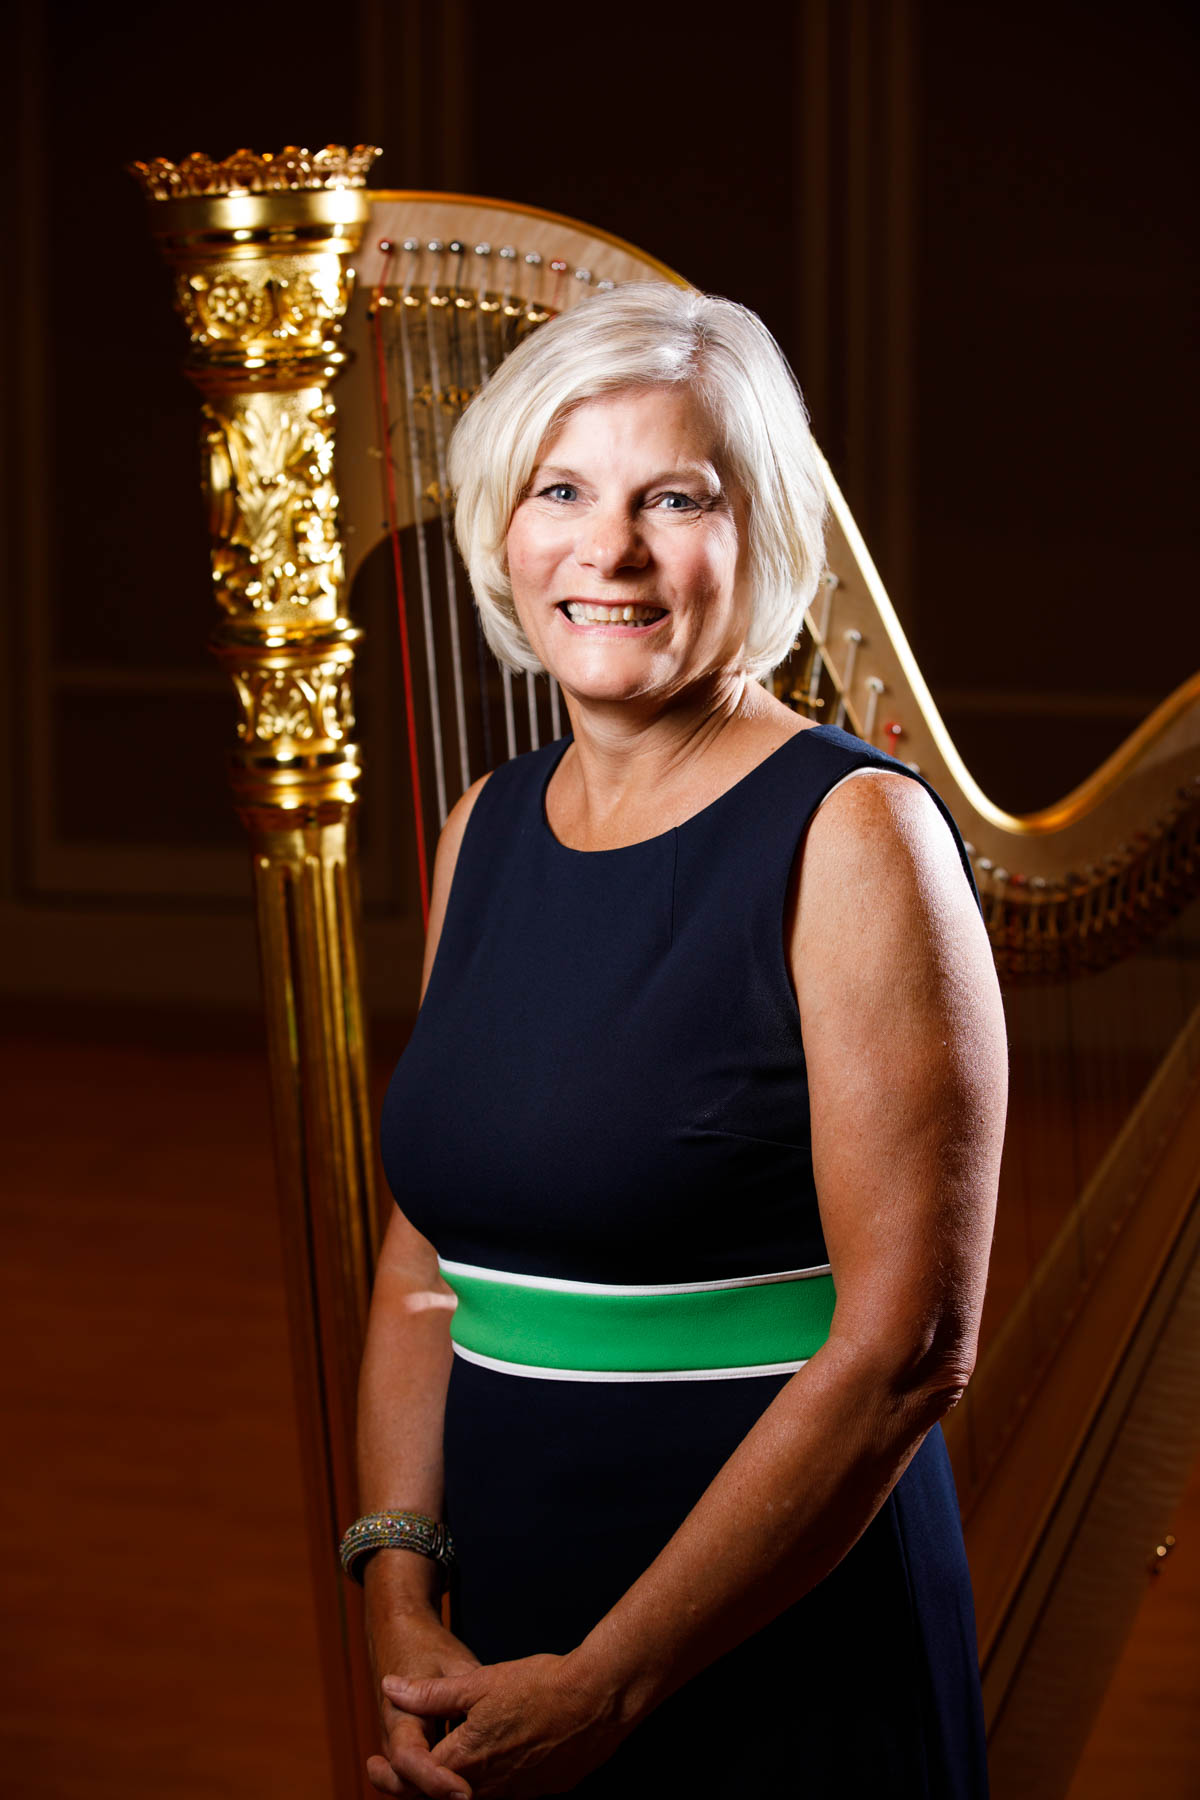 USA International Harp Competition Board of Directors member Jill Pitz poses for a portrait during the 11th USA International Harp Competition at Indiana University in Bloomington, Indiana on Saturday, July 13, 2019. (Photo by James Brosher)